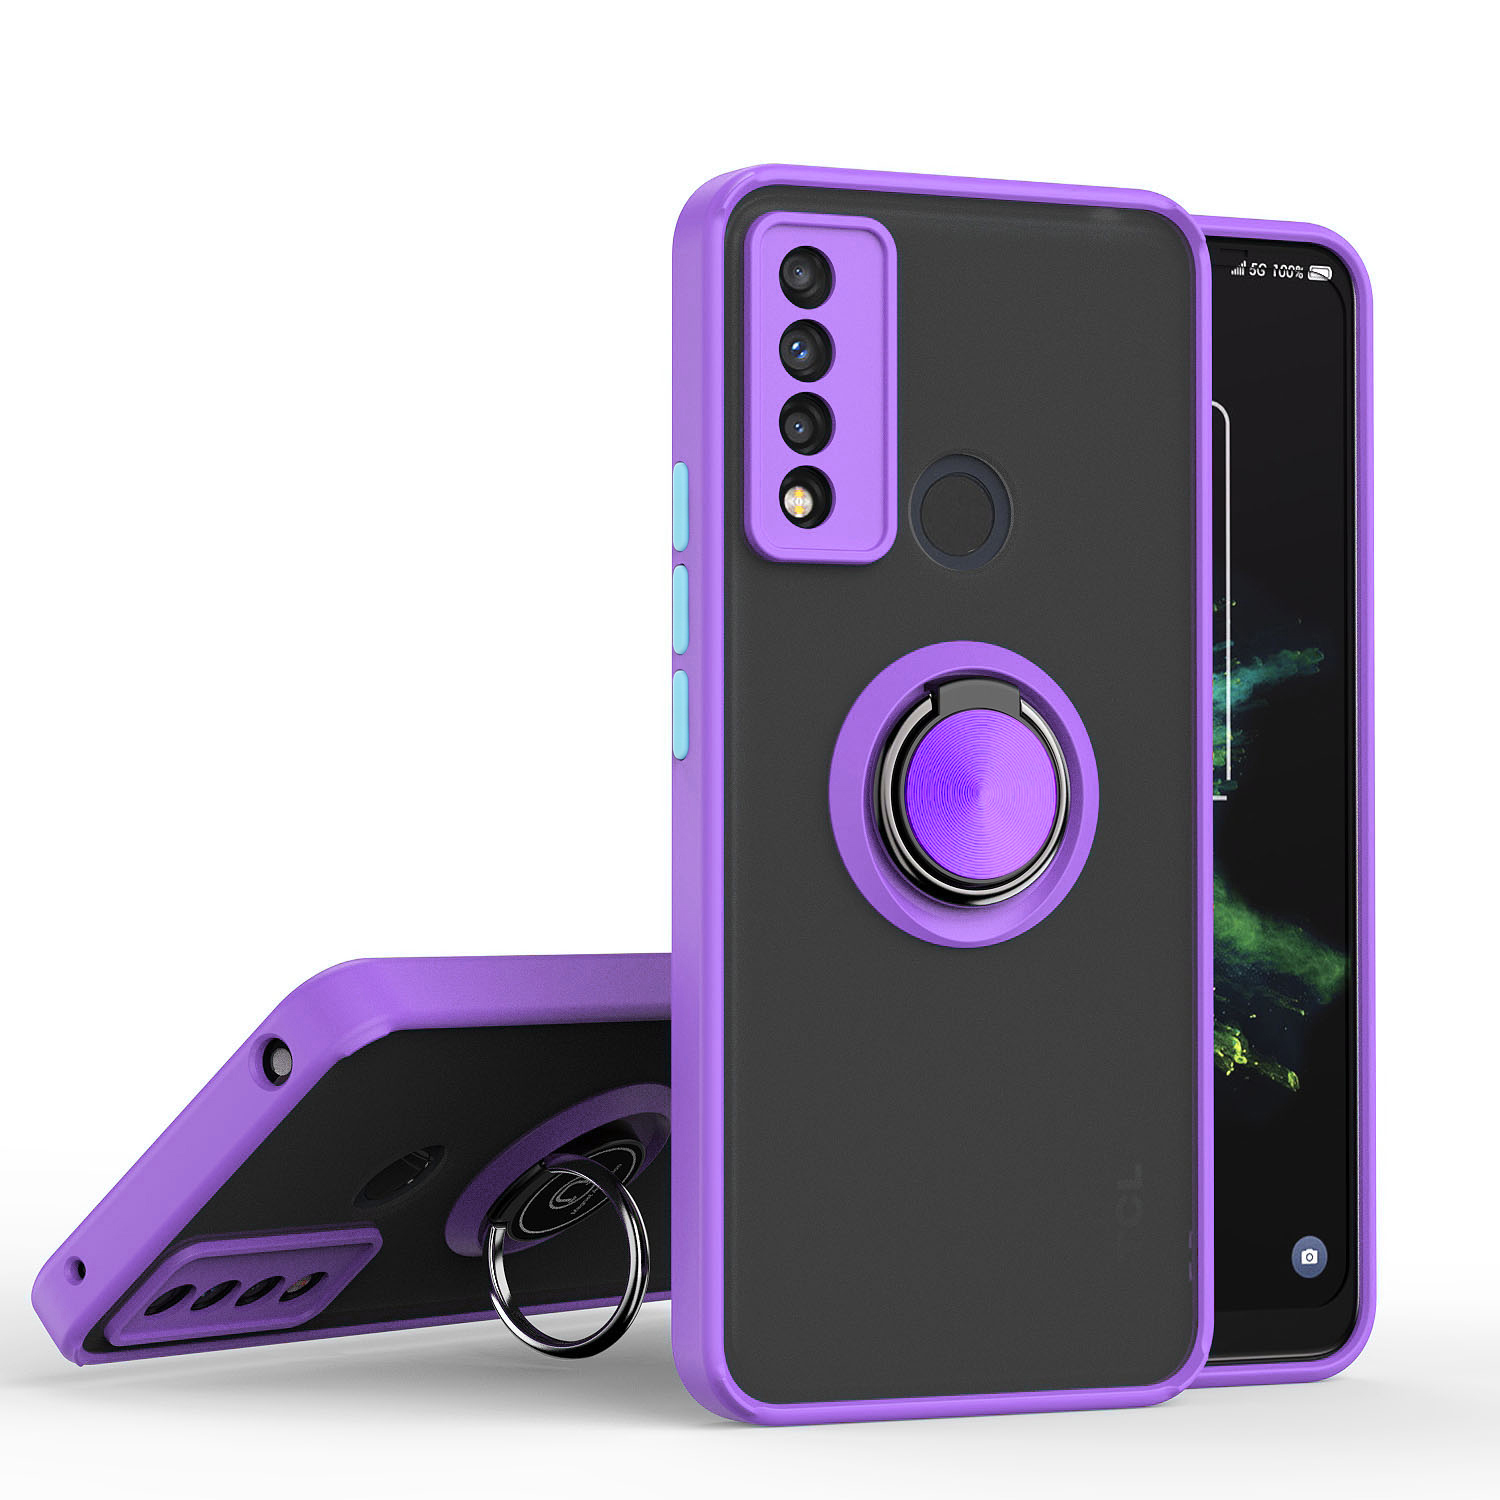 Tuff Slim Armor Hybrid RING Stand Case for TCL 20 XE (Purple)